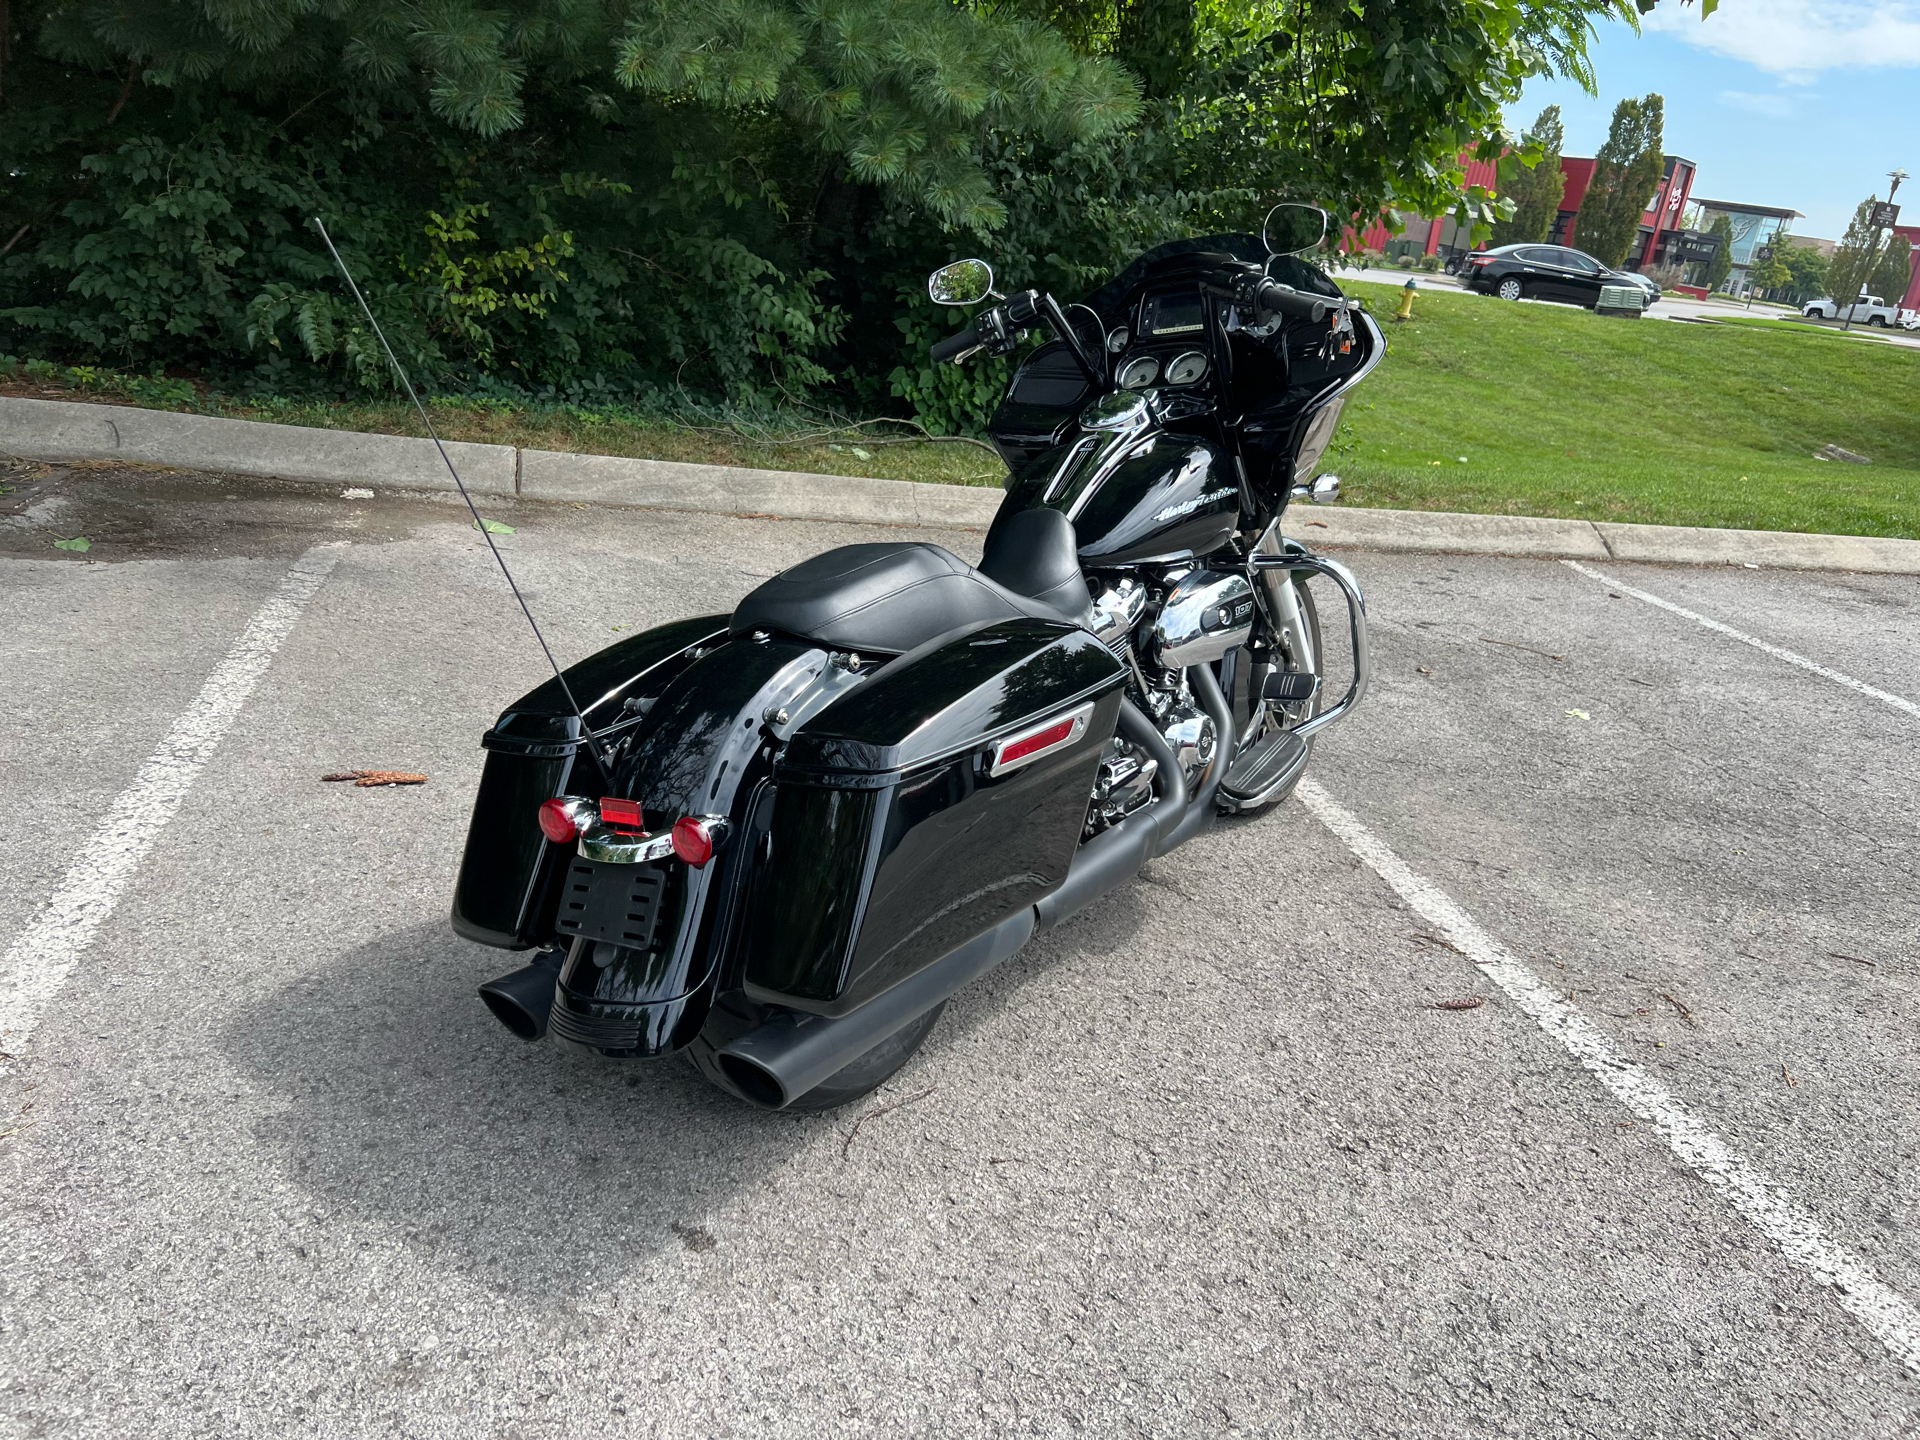 2017 Harley-Davidson Road Glide® Special in Franklin, Tennessee - Photo 10